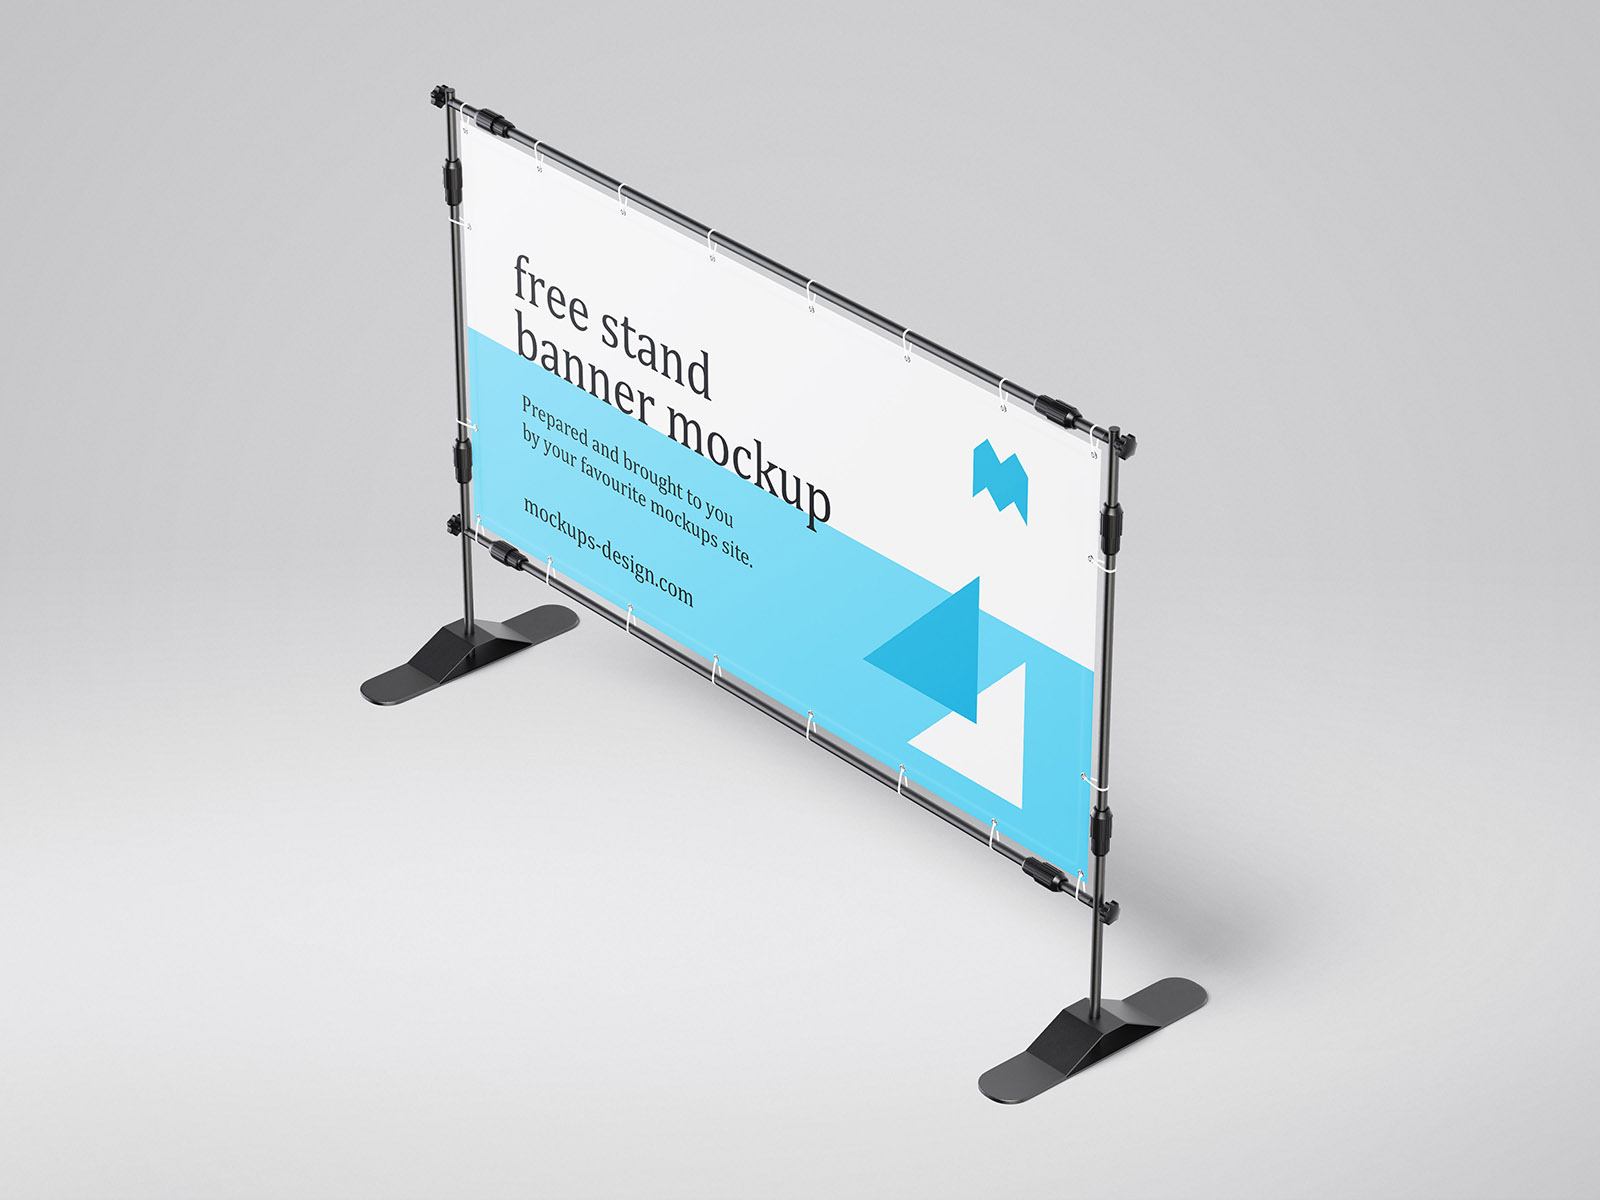 Free Rectangle Event Banner Stand Mockup PSD Set